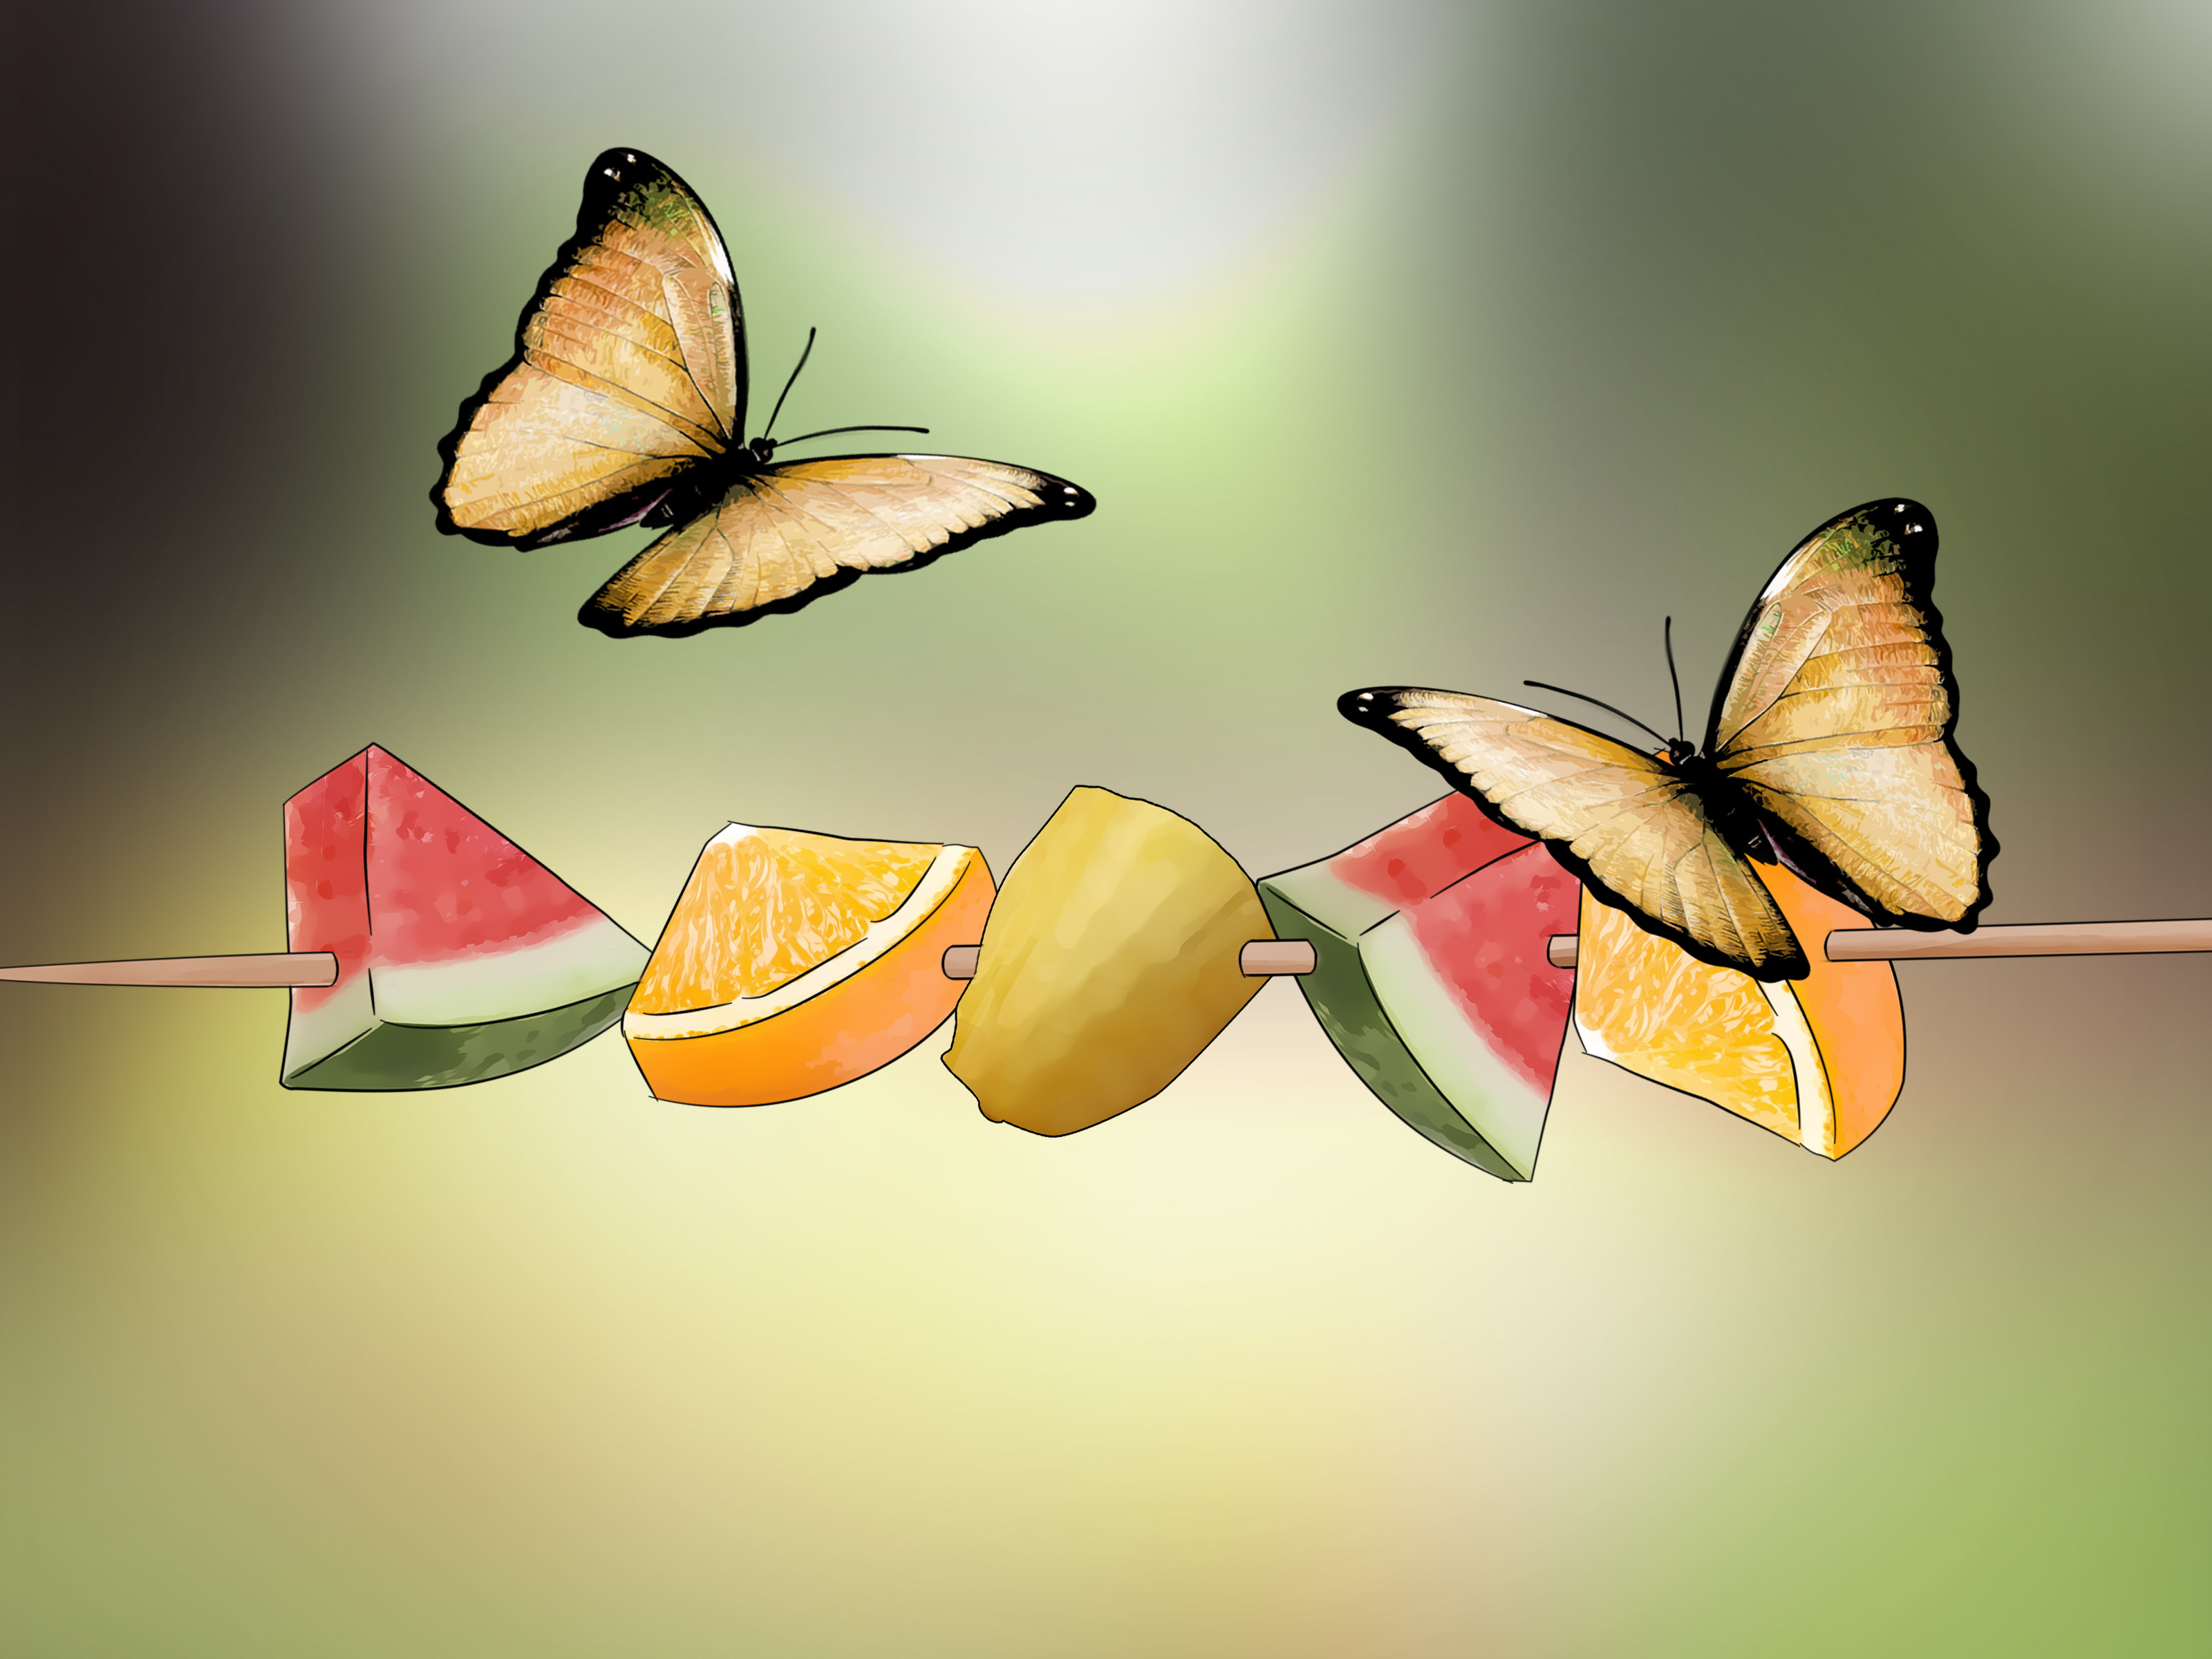 3 Ways to Feed Butterflies - wikiHow